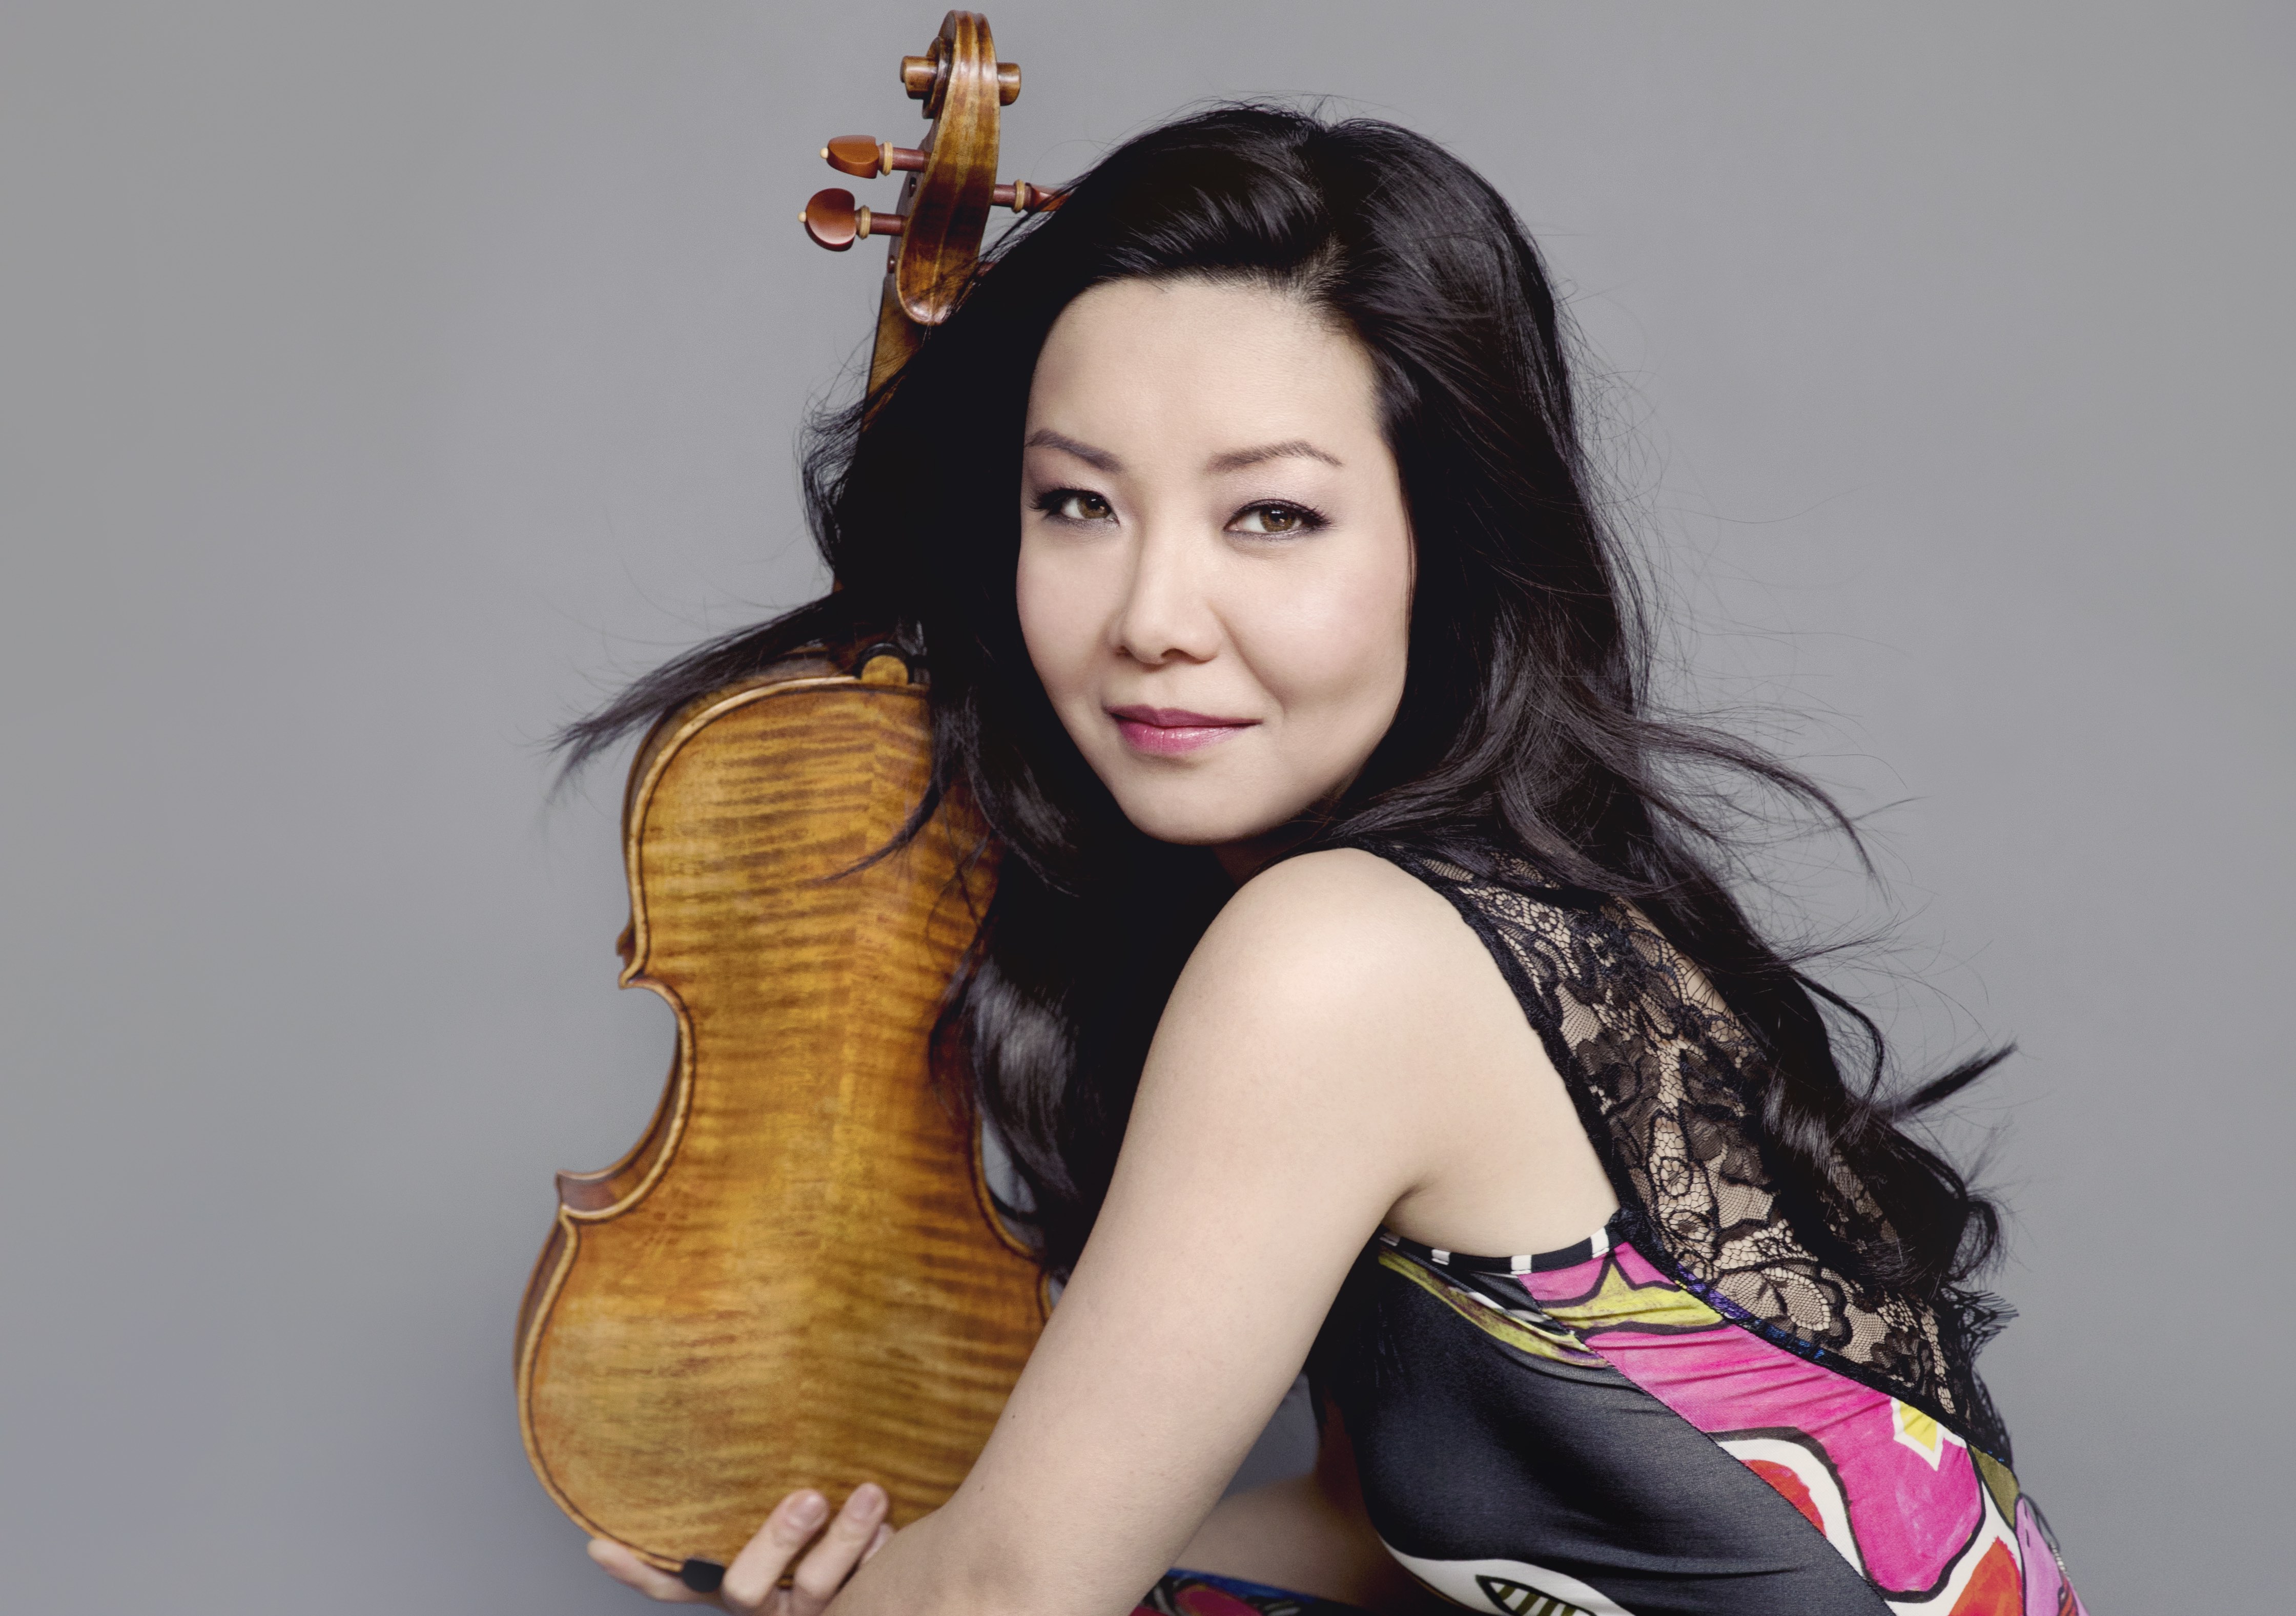 Artist Management Worldwide is proud to welcome award-winning Chinese Canadian violinist Yi-Jia Susanne Hou to its roster.